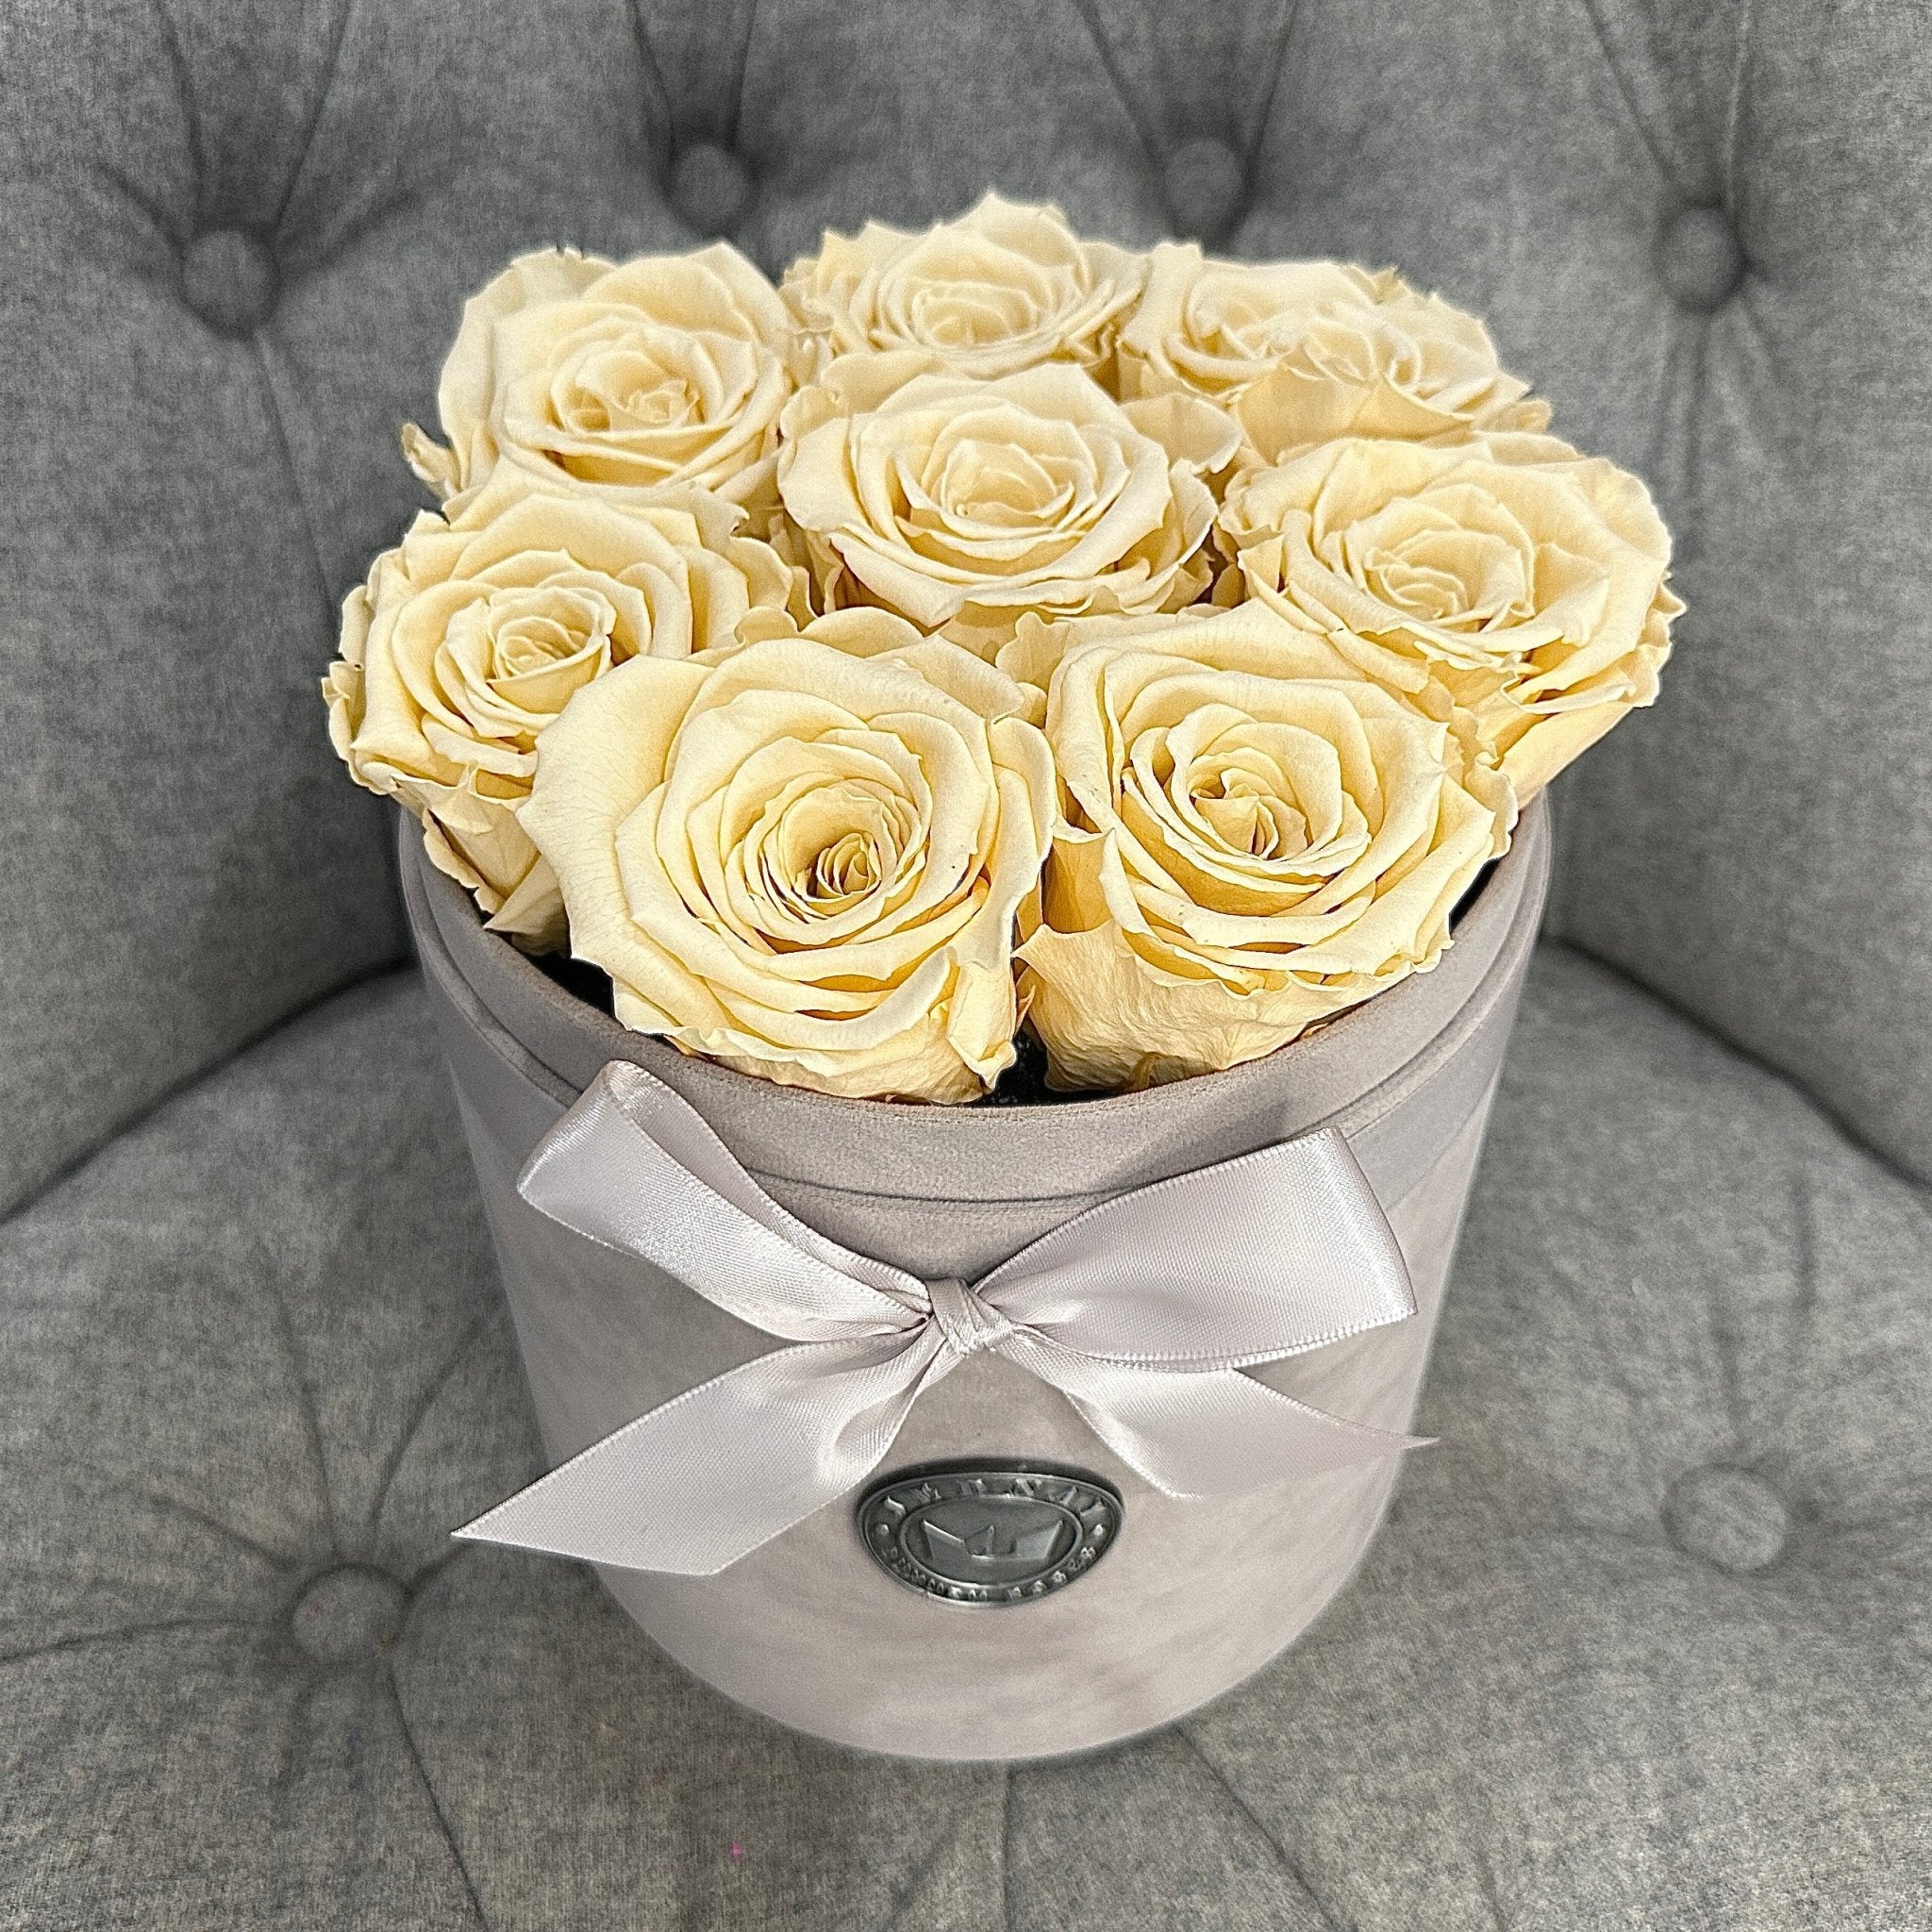 Medium Grey Suede Forever Rose Box - Champagne Eternal Roses - Jednay Roses